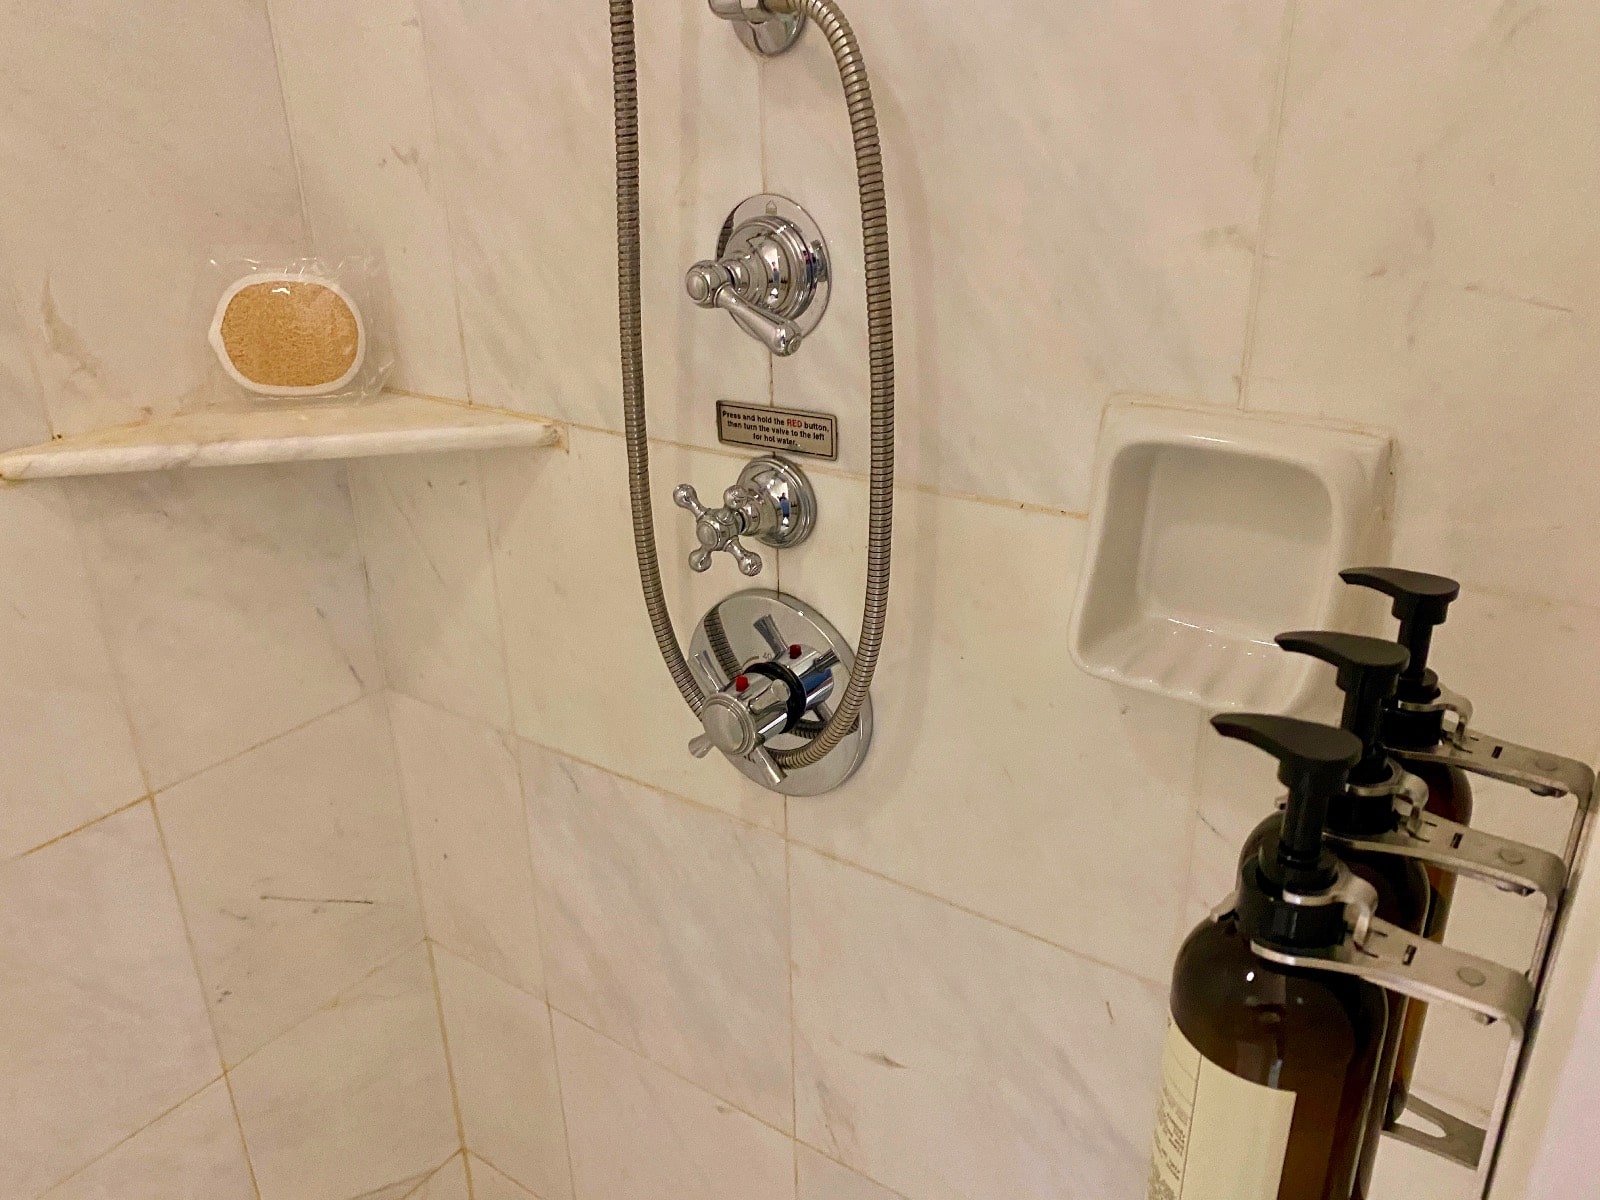 a shower head with a hose and a soap dispenser